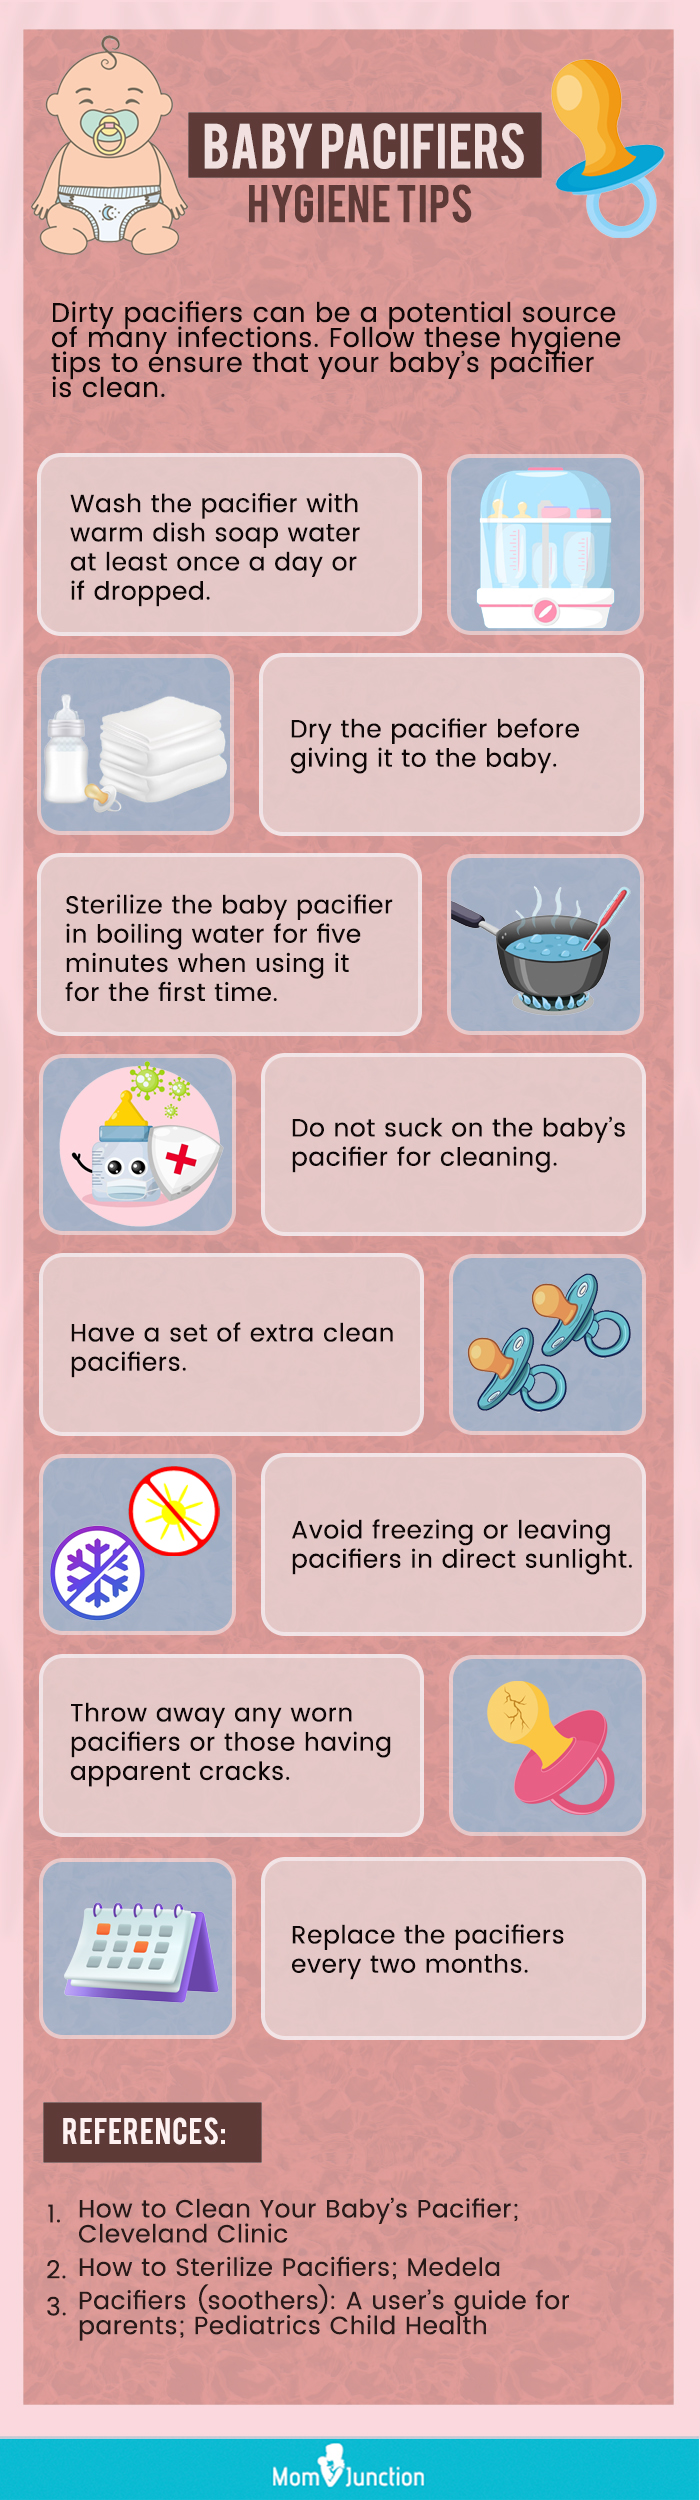 Baby Pacifiers Hygiene Tips